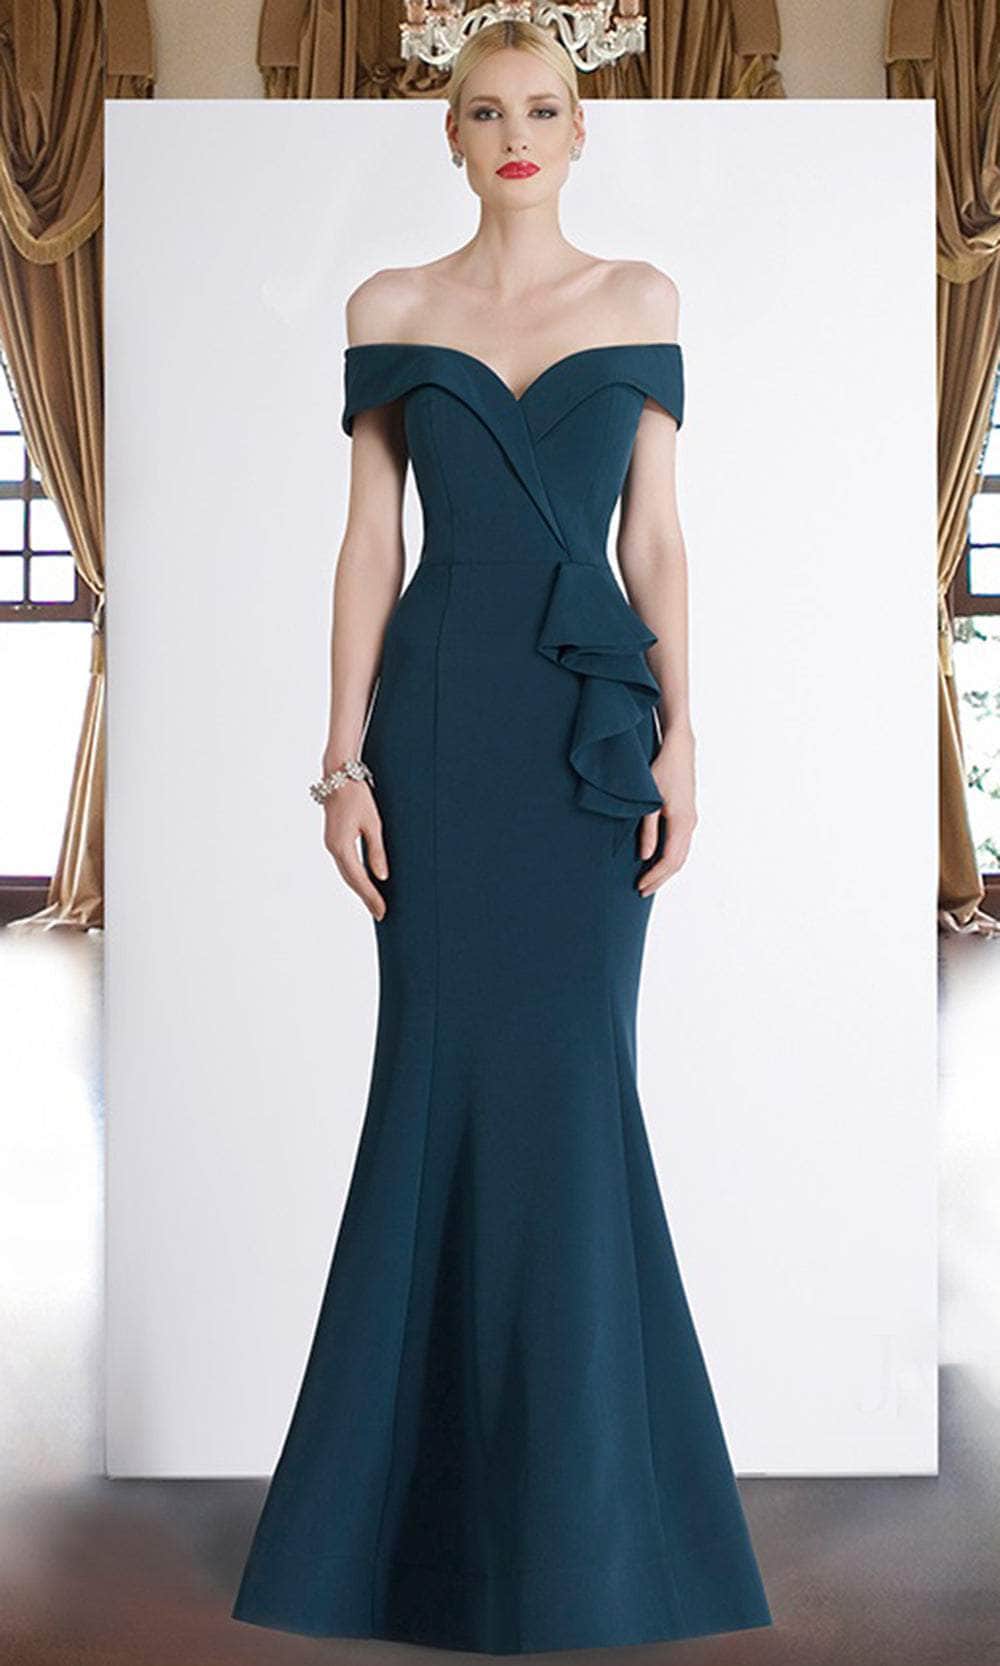 Image of Janique - 1936 Off Shoulder Ruffled Accent Mermaid Gown in Teal